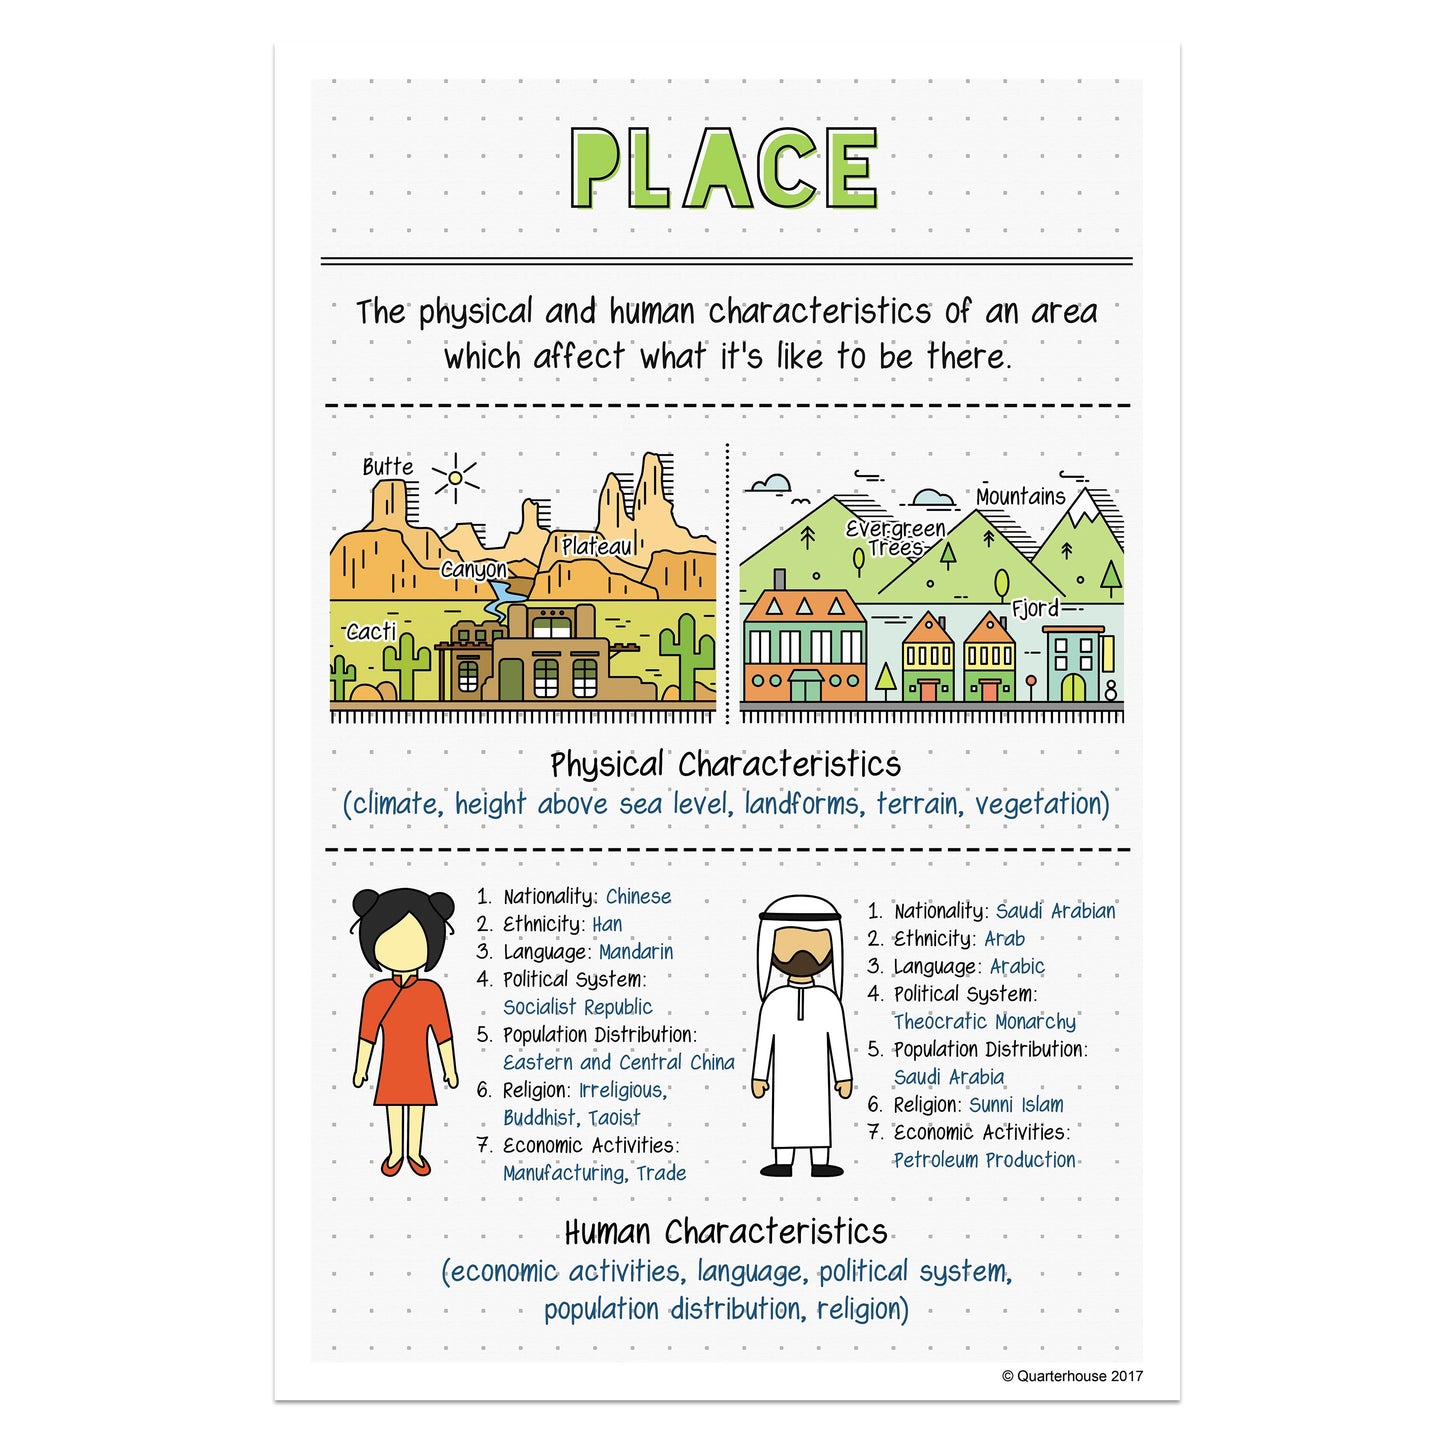 Quarterhouse 5 Themes of Geography - Place Poster, Social Studies Classroom Materials for Teachers